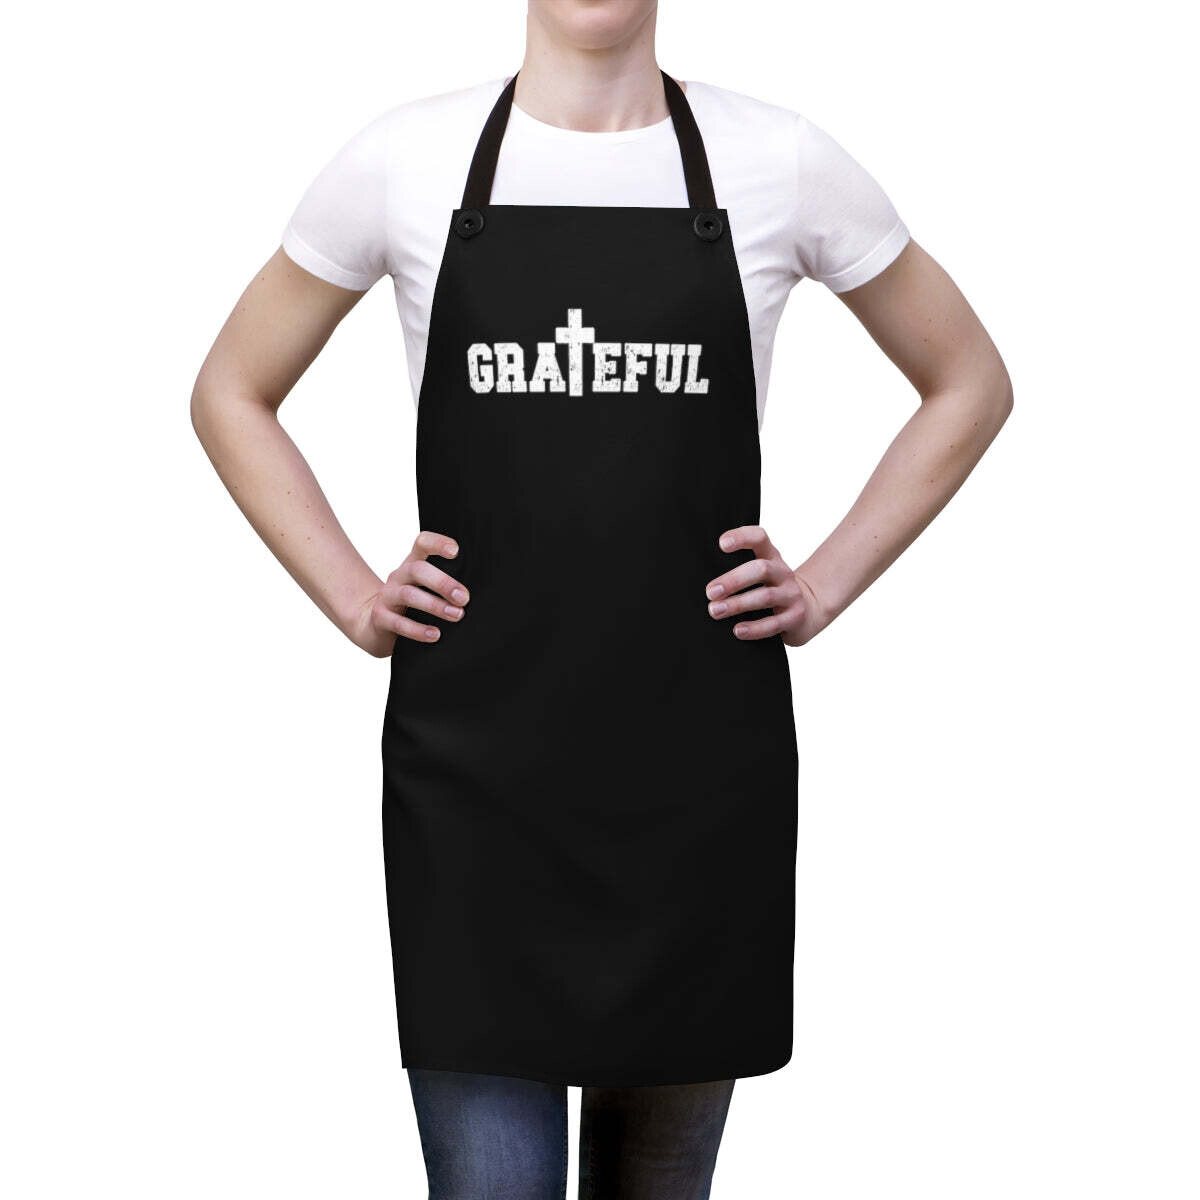 Home Accessories, Apron for Cooking or Cleaning, Grateful Christian Inspiration Affirmation